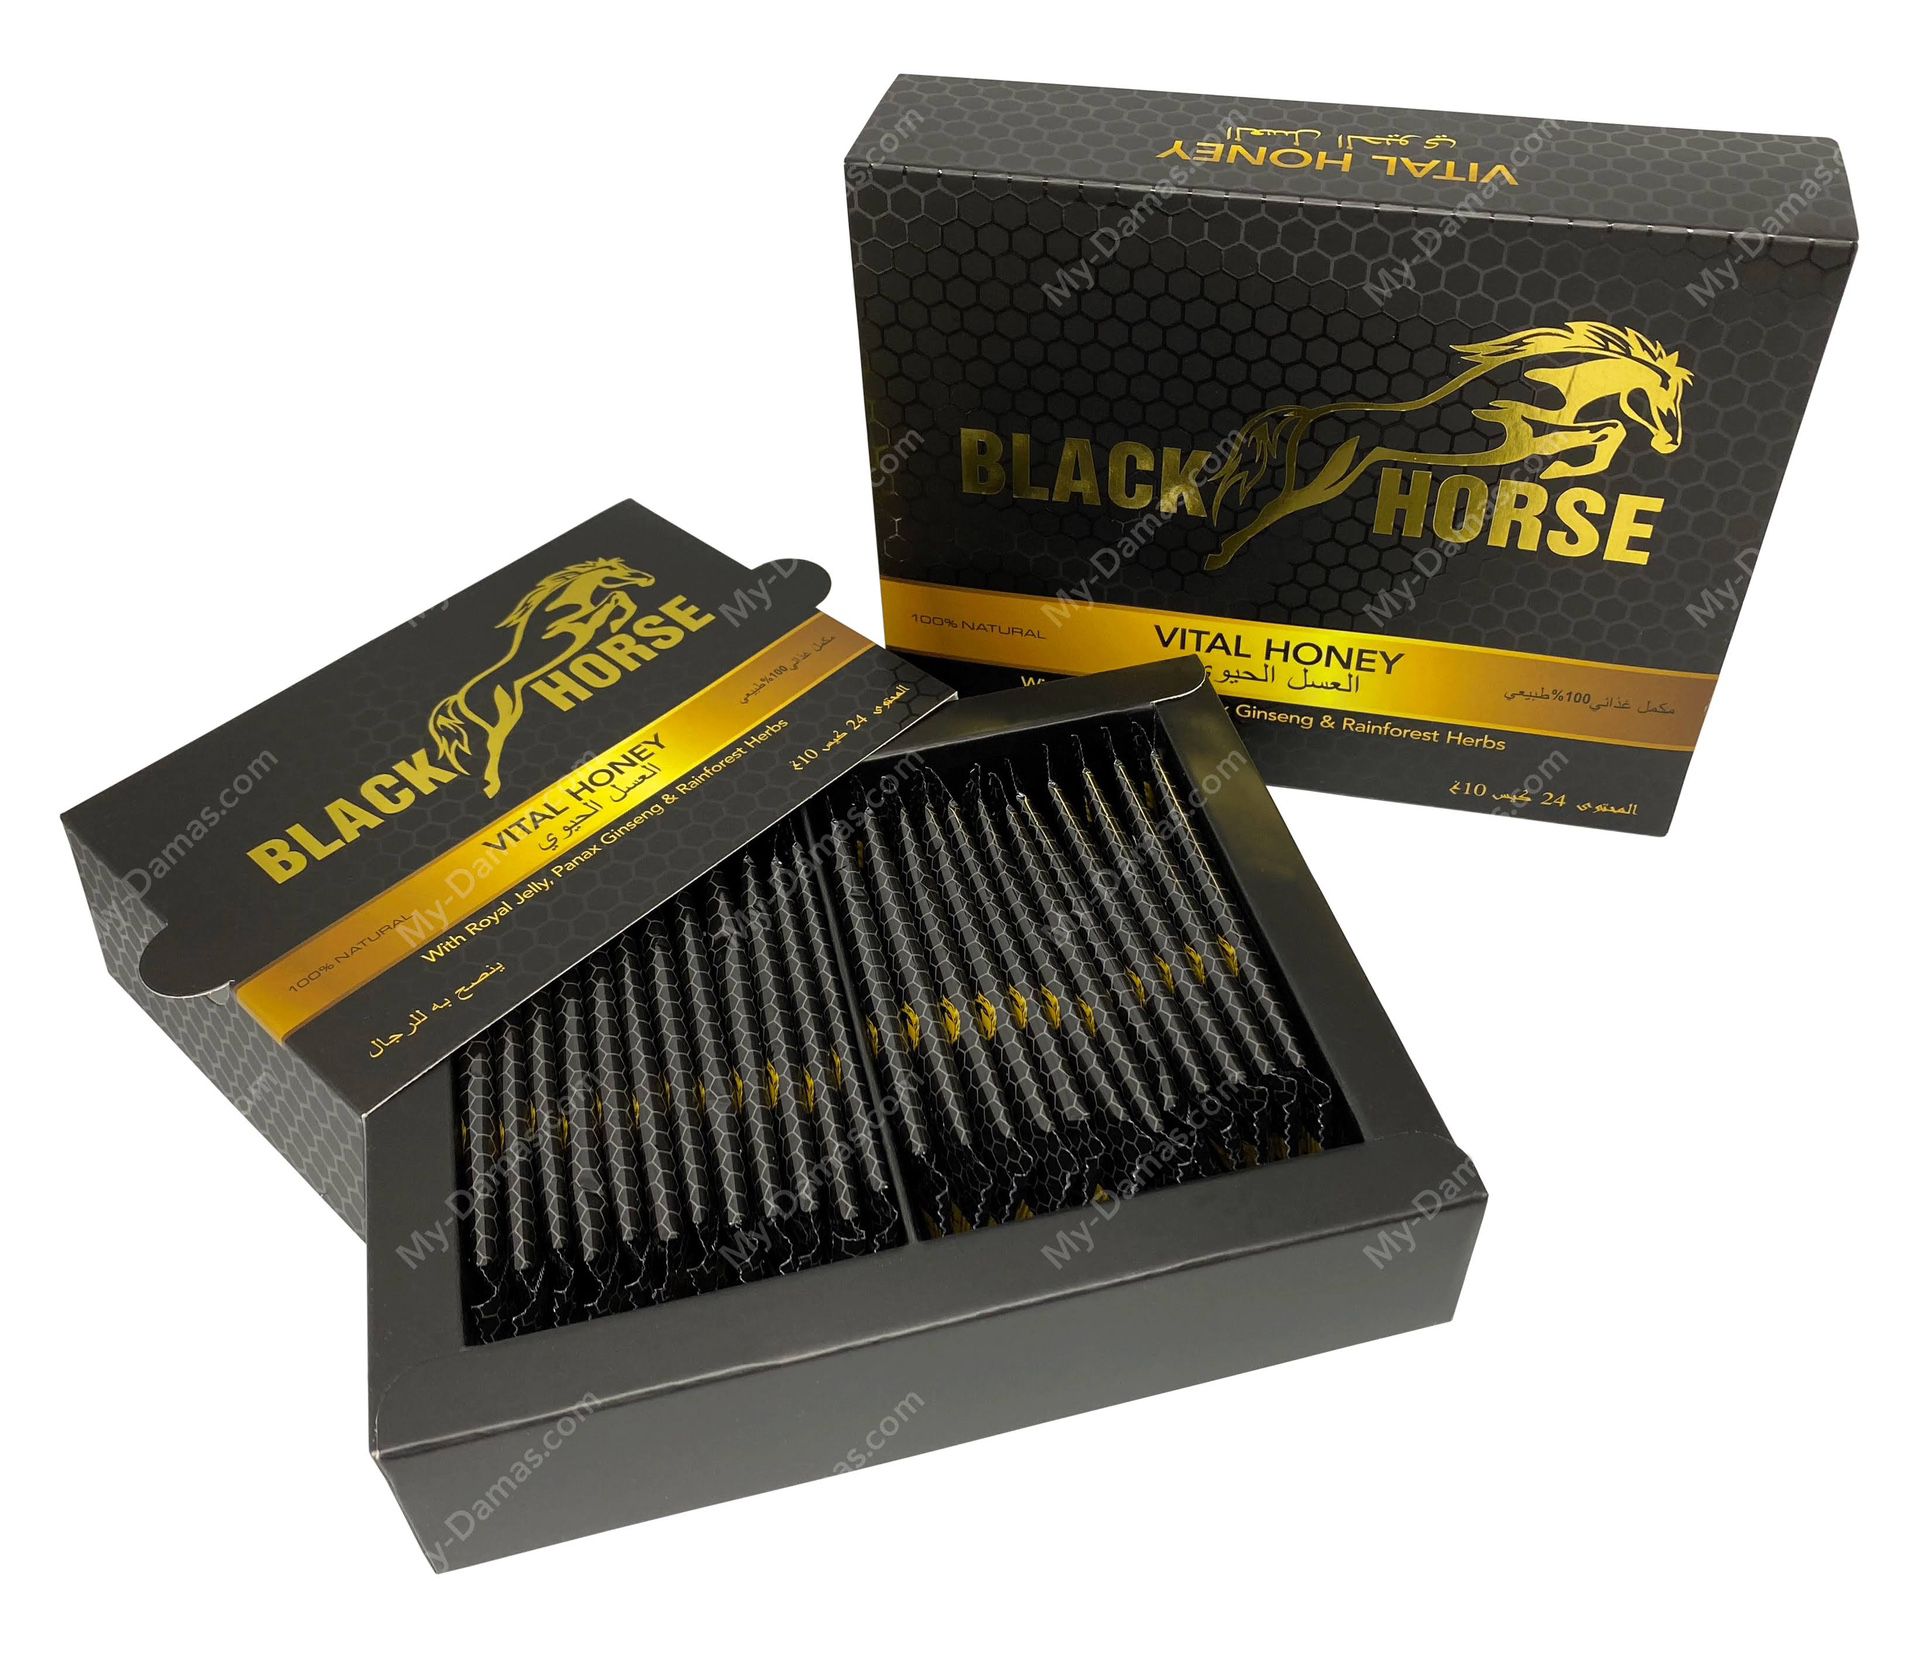 BLACK HORSE ORGANIC HONEY WITH NATURAL JELLY BEE POLLEN- MEN (PACK OF 24  SACHET for Sale in Jersey City, NJ - OfferUp